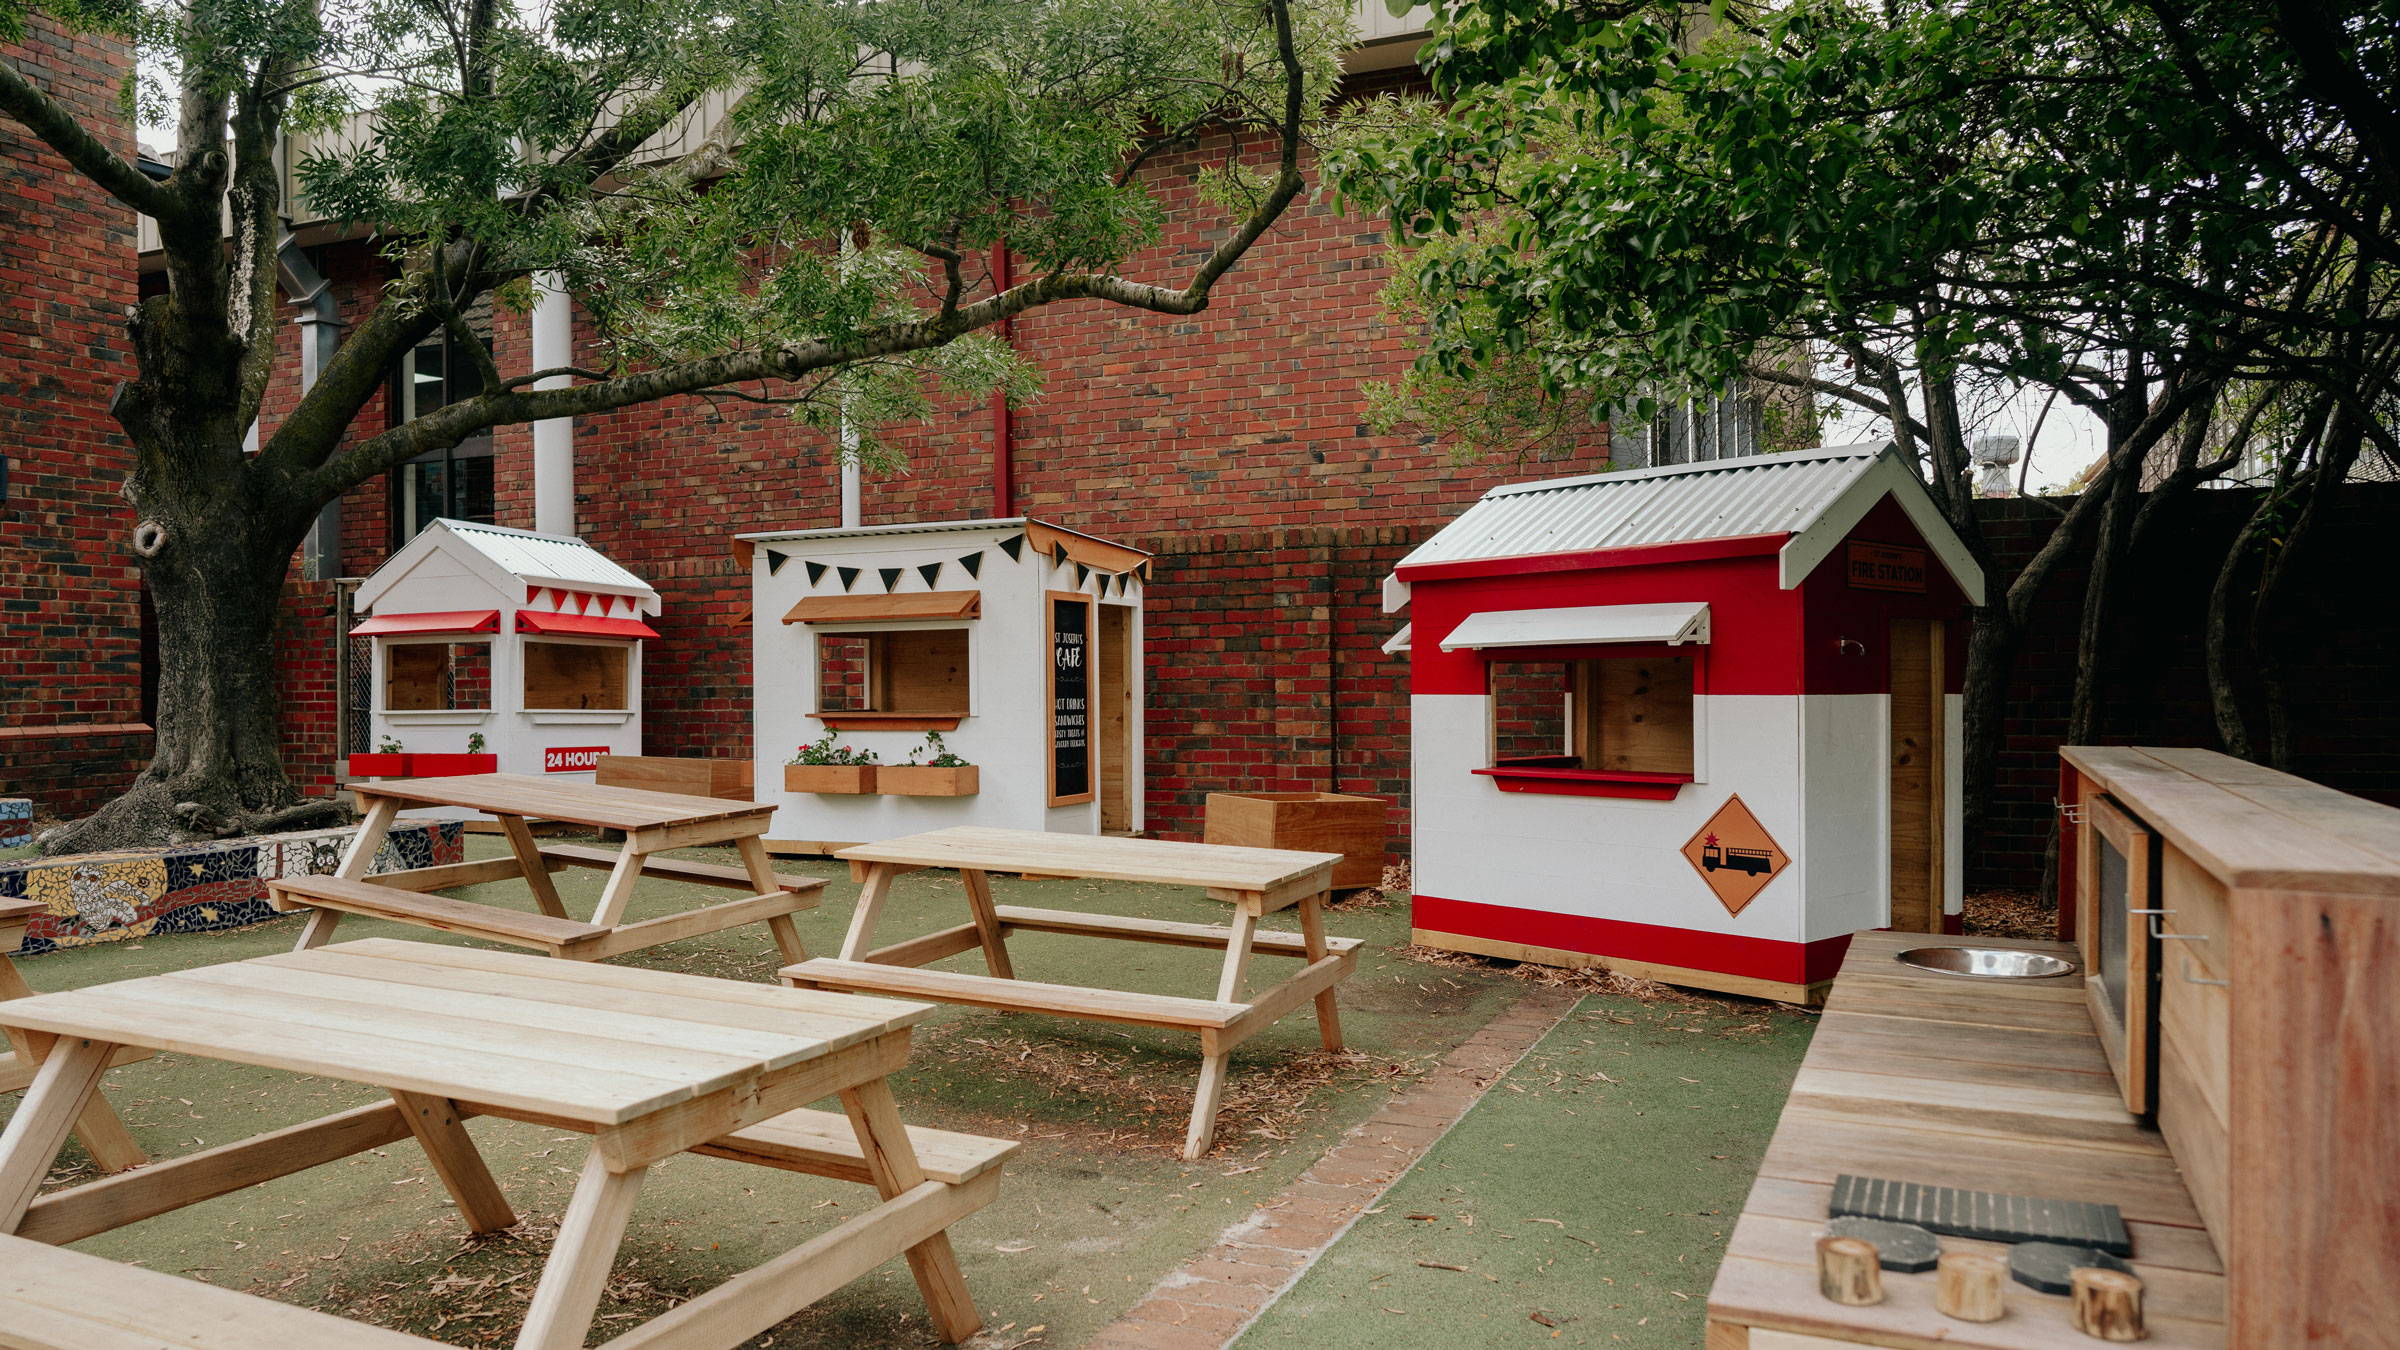 Themed cubby houses with a mud kitchen and picnic tables.